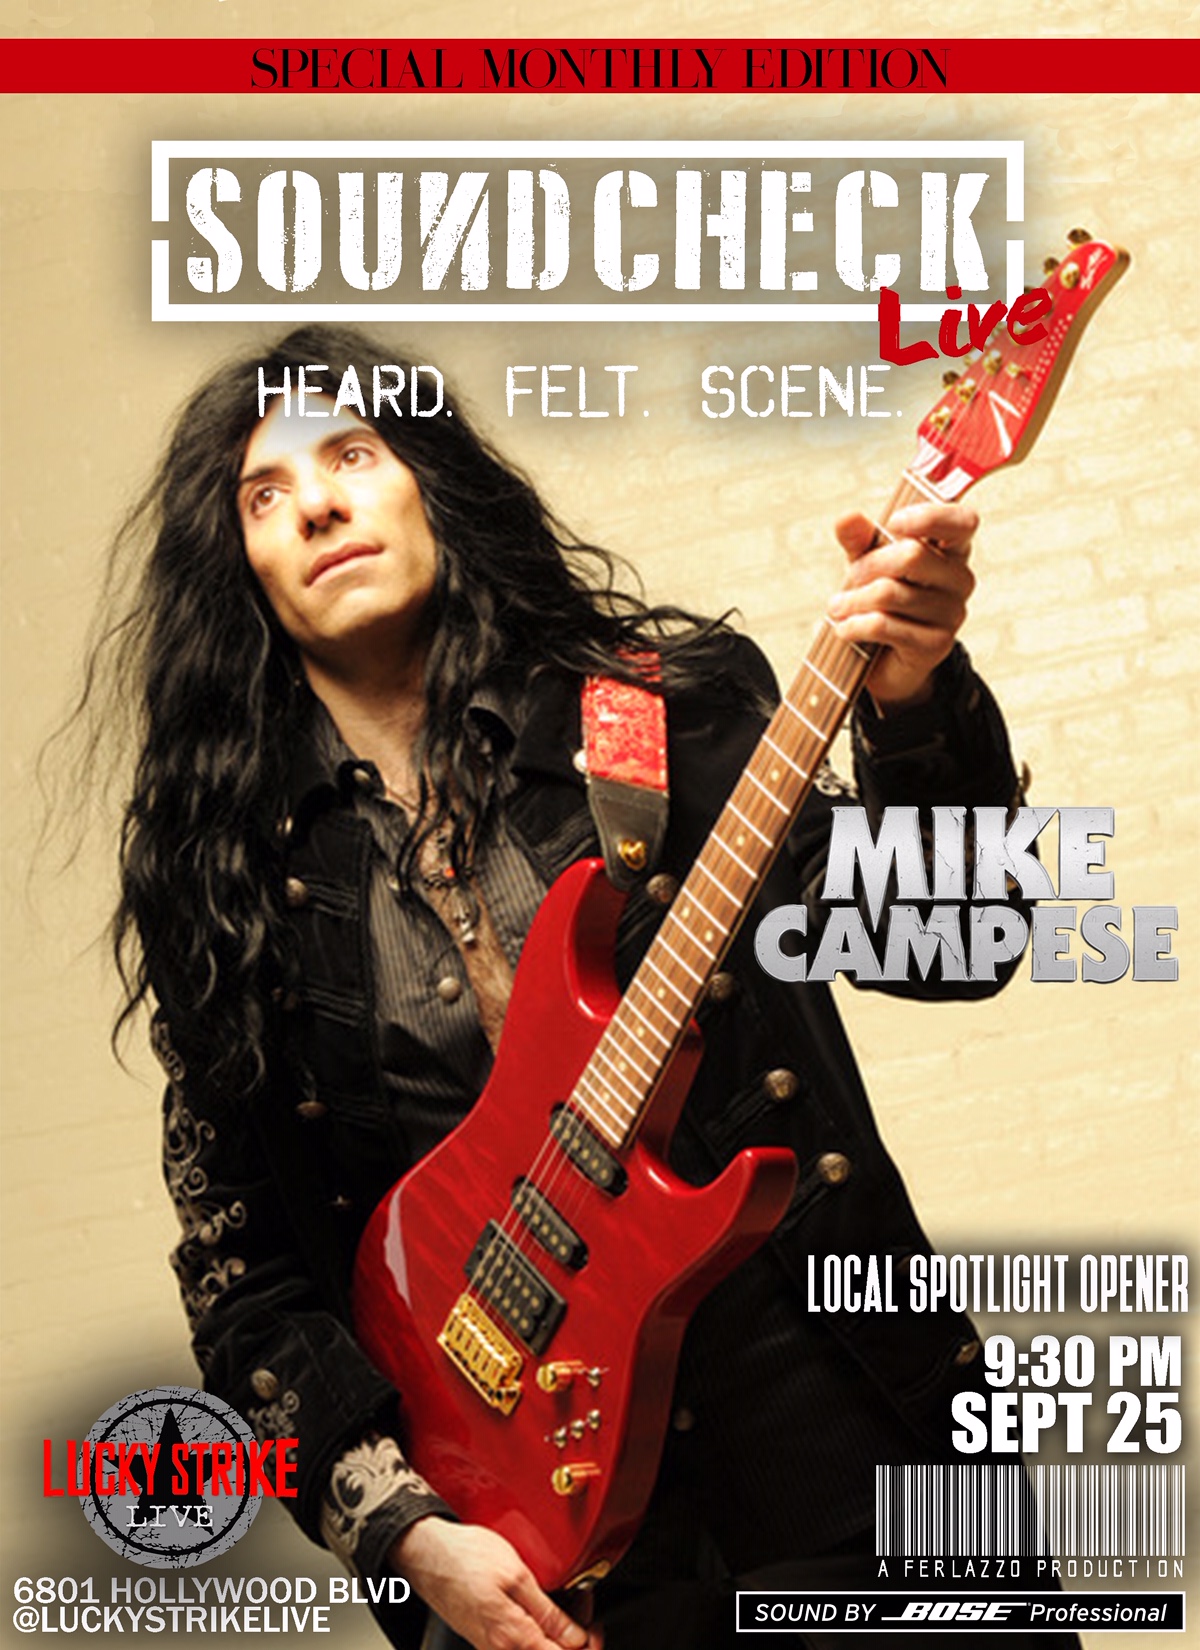 Mike Campese Soundcheck Live, Hollywood Cover Flyer.